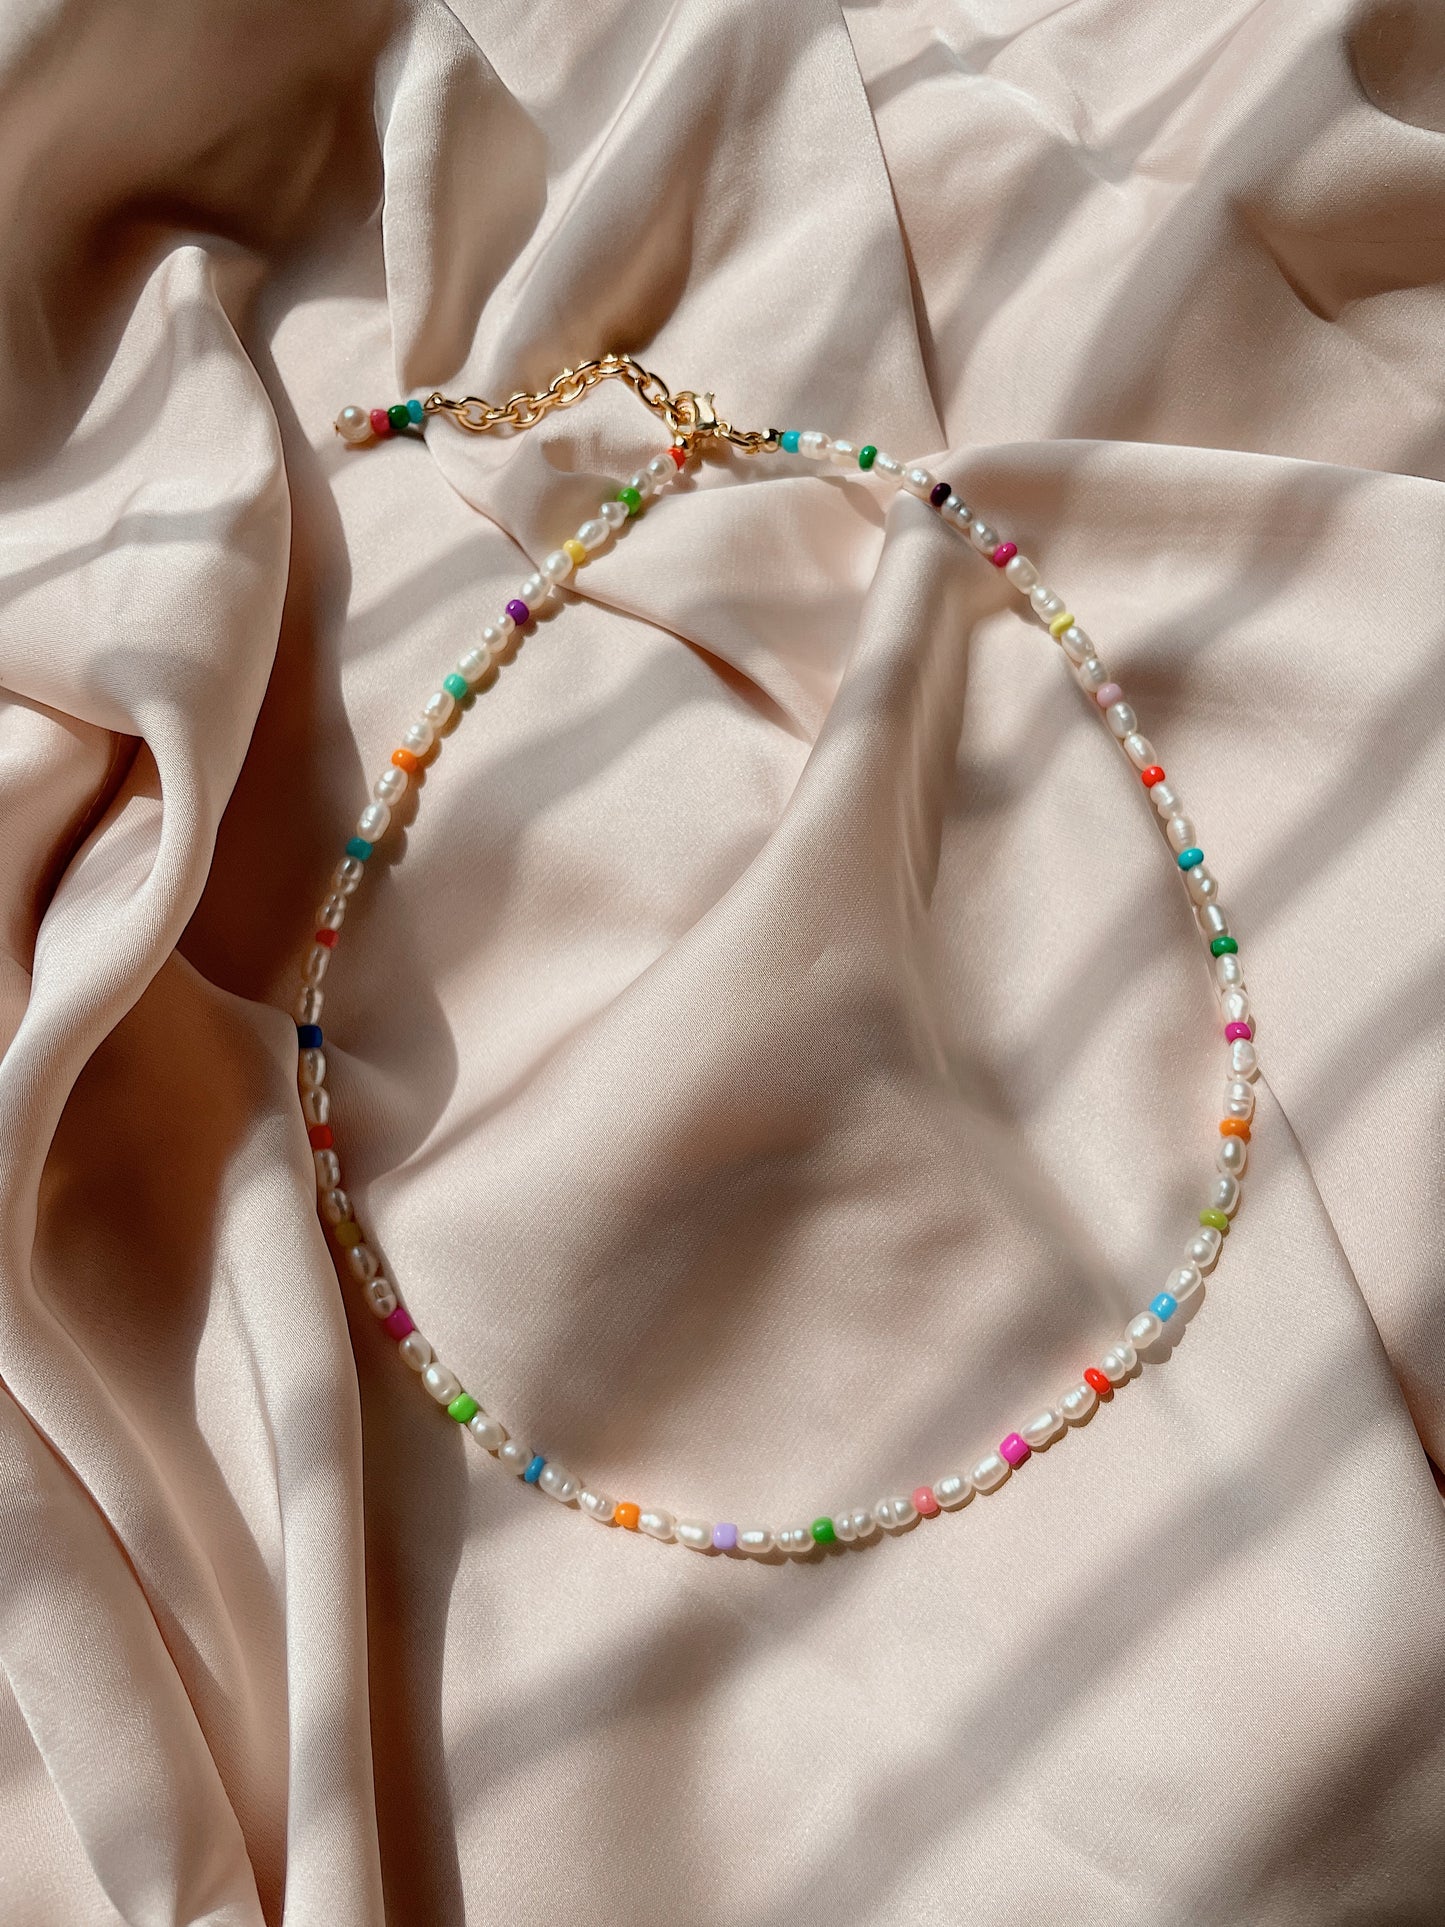 QUINN - 90s style pearl necklace with rainbow beads